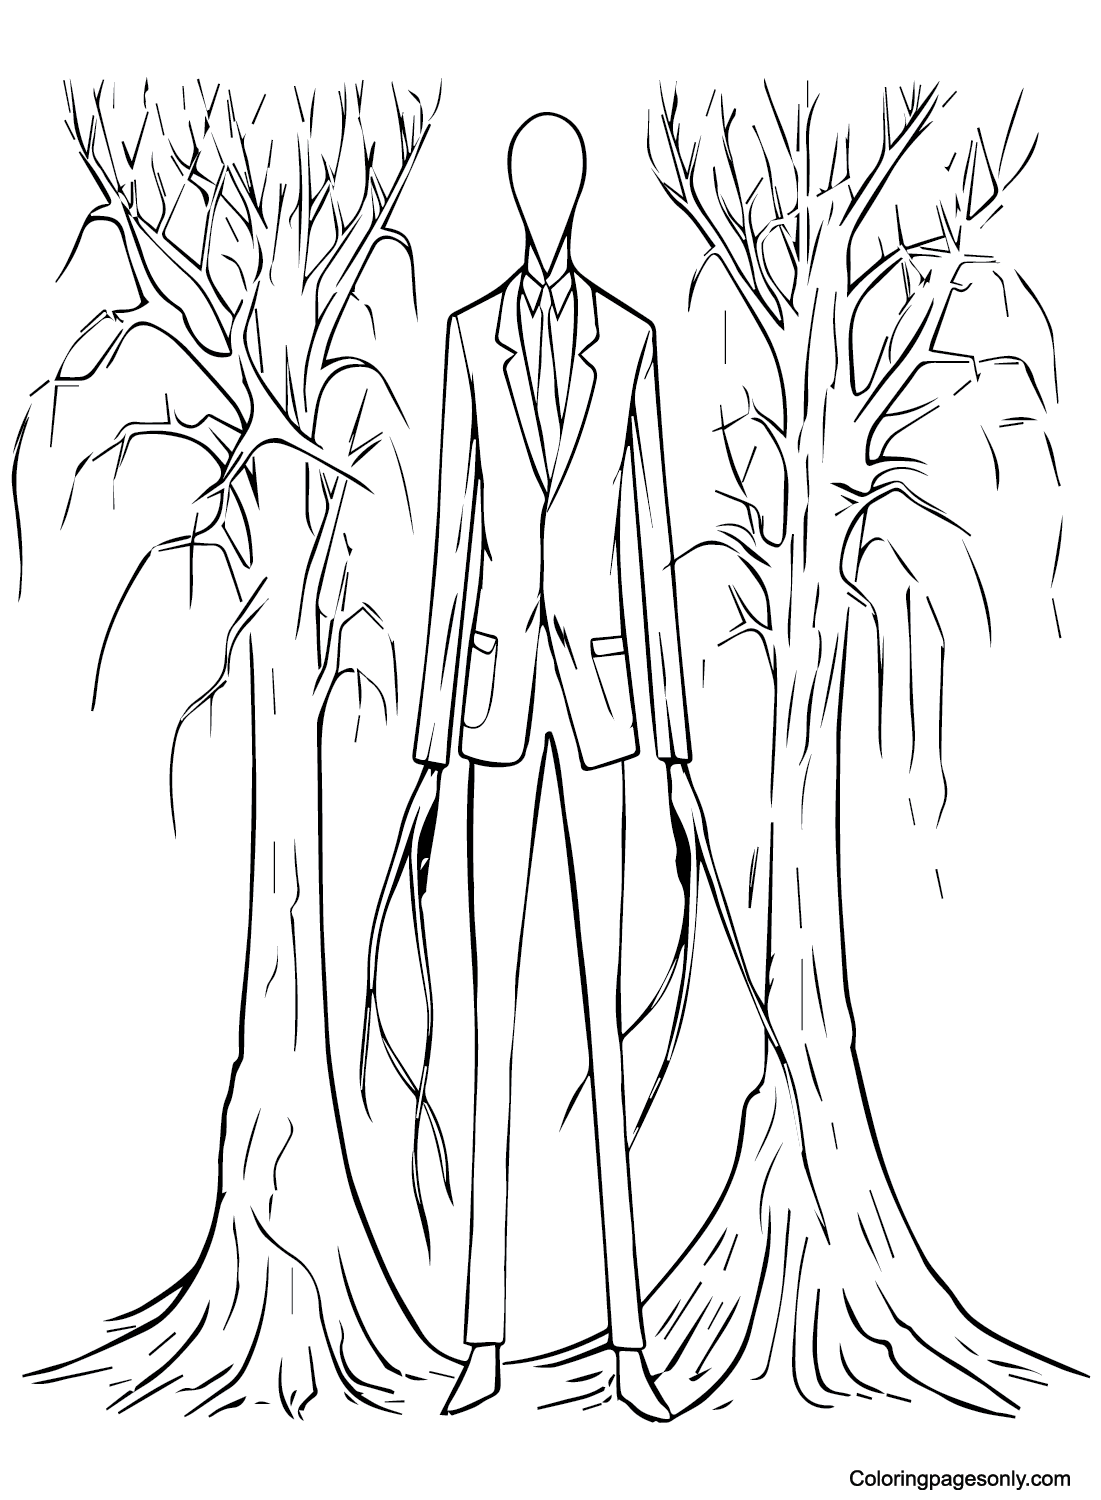 Free Slender Man Pictures Coloring Page